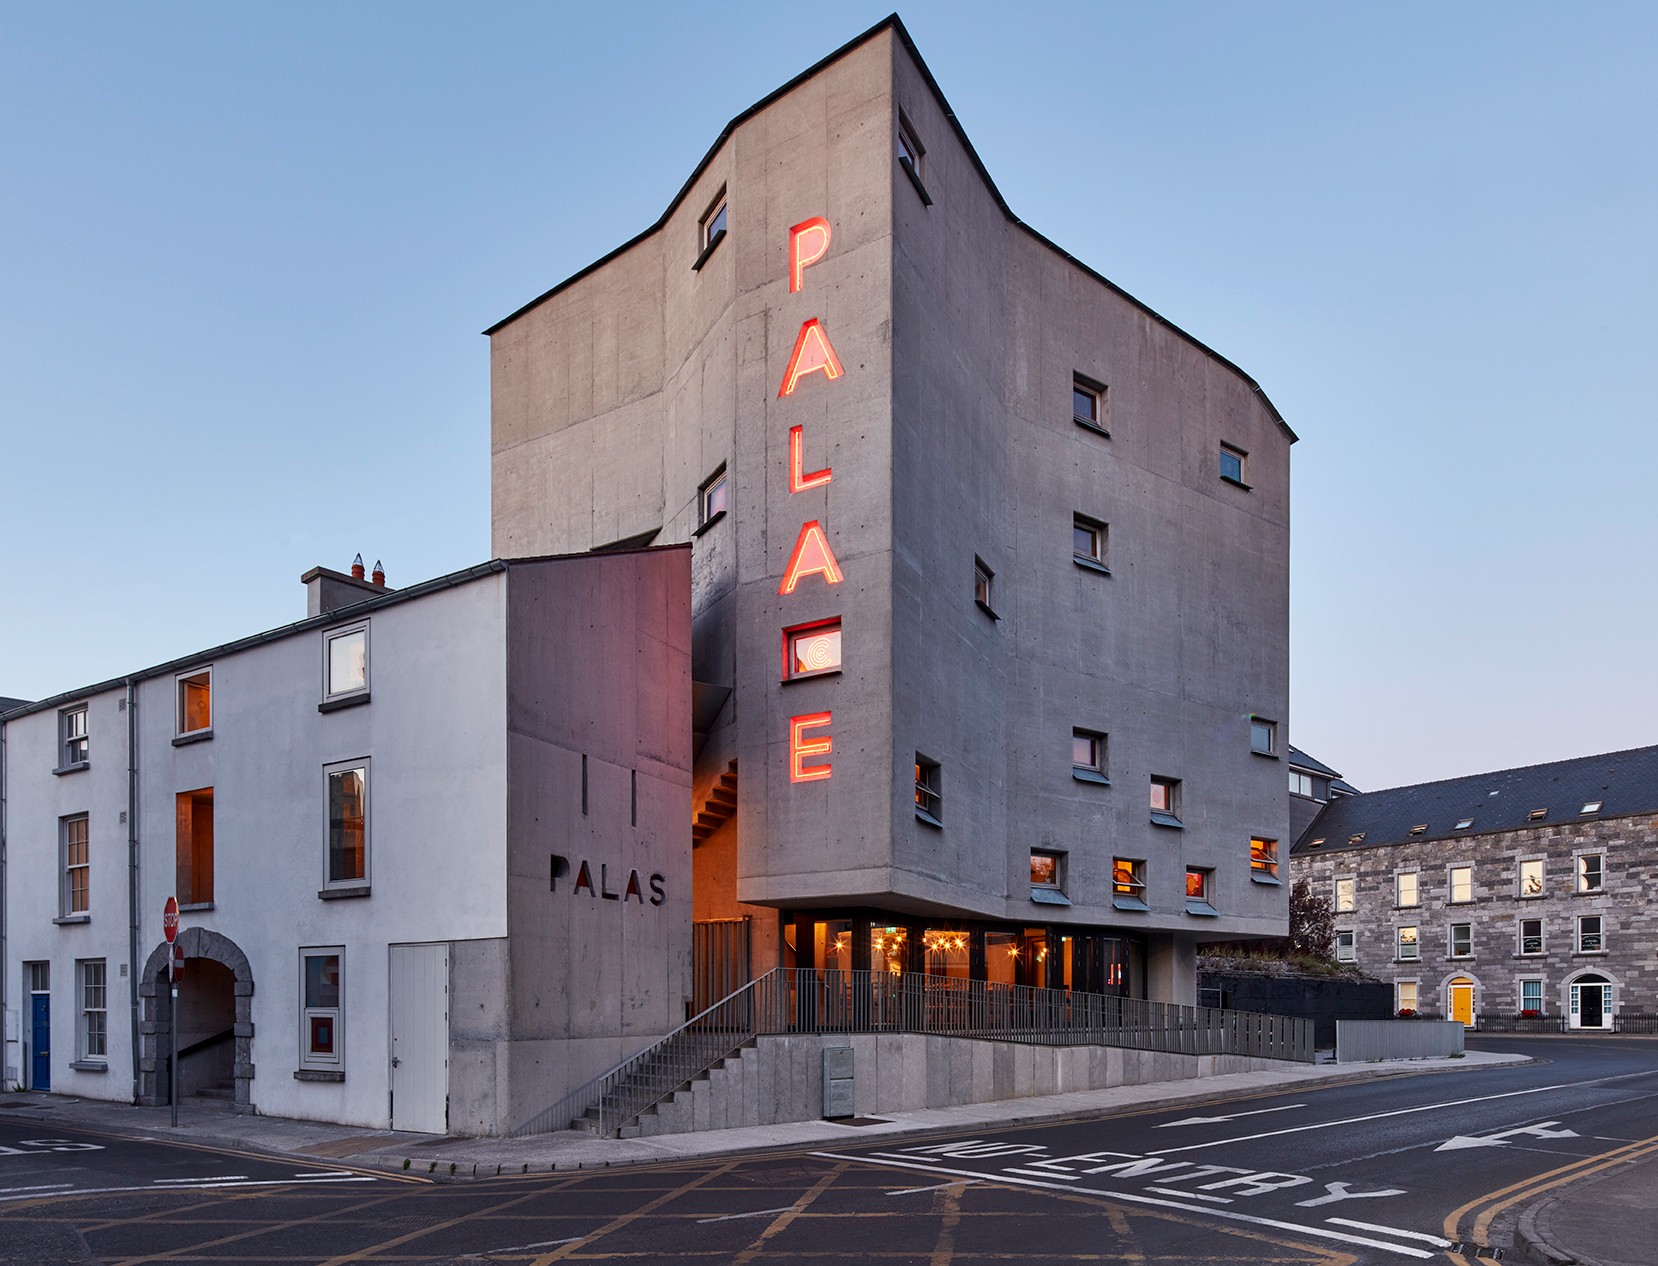 Galway's Pálás Shortlisted for 2018 World Architecture Awards